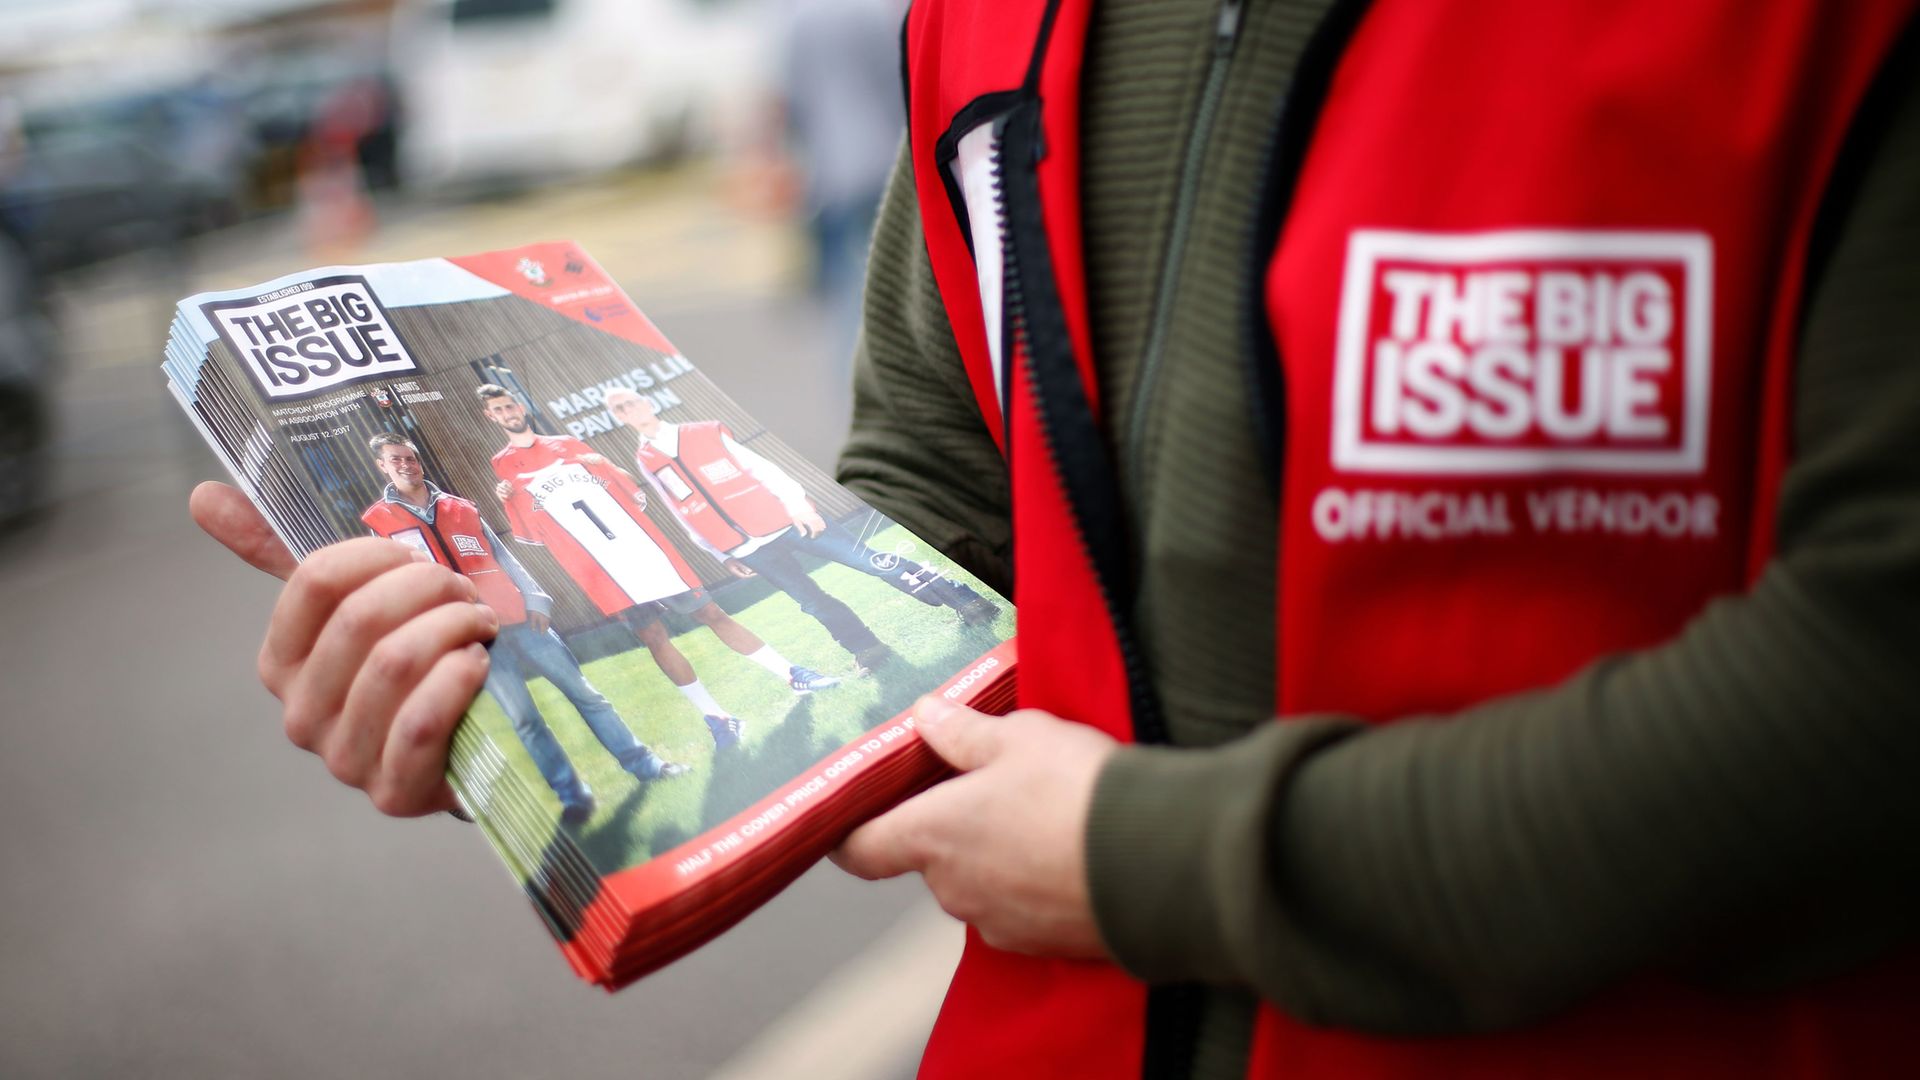 A vendor selling The Big Issue magazine - Credit: PA